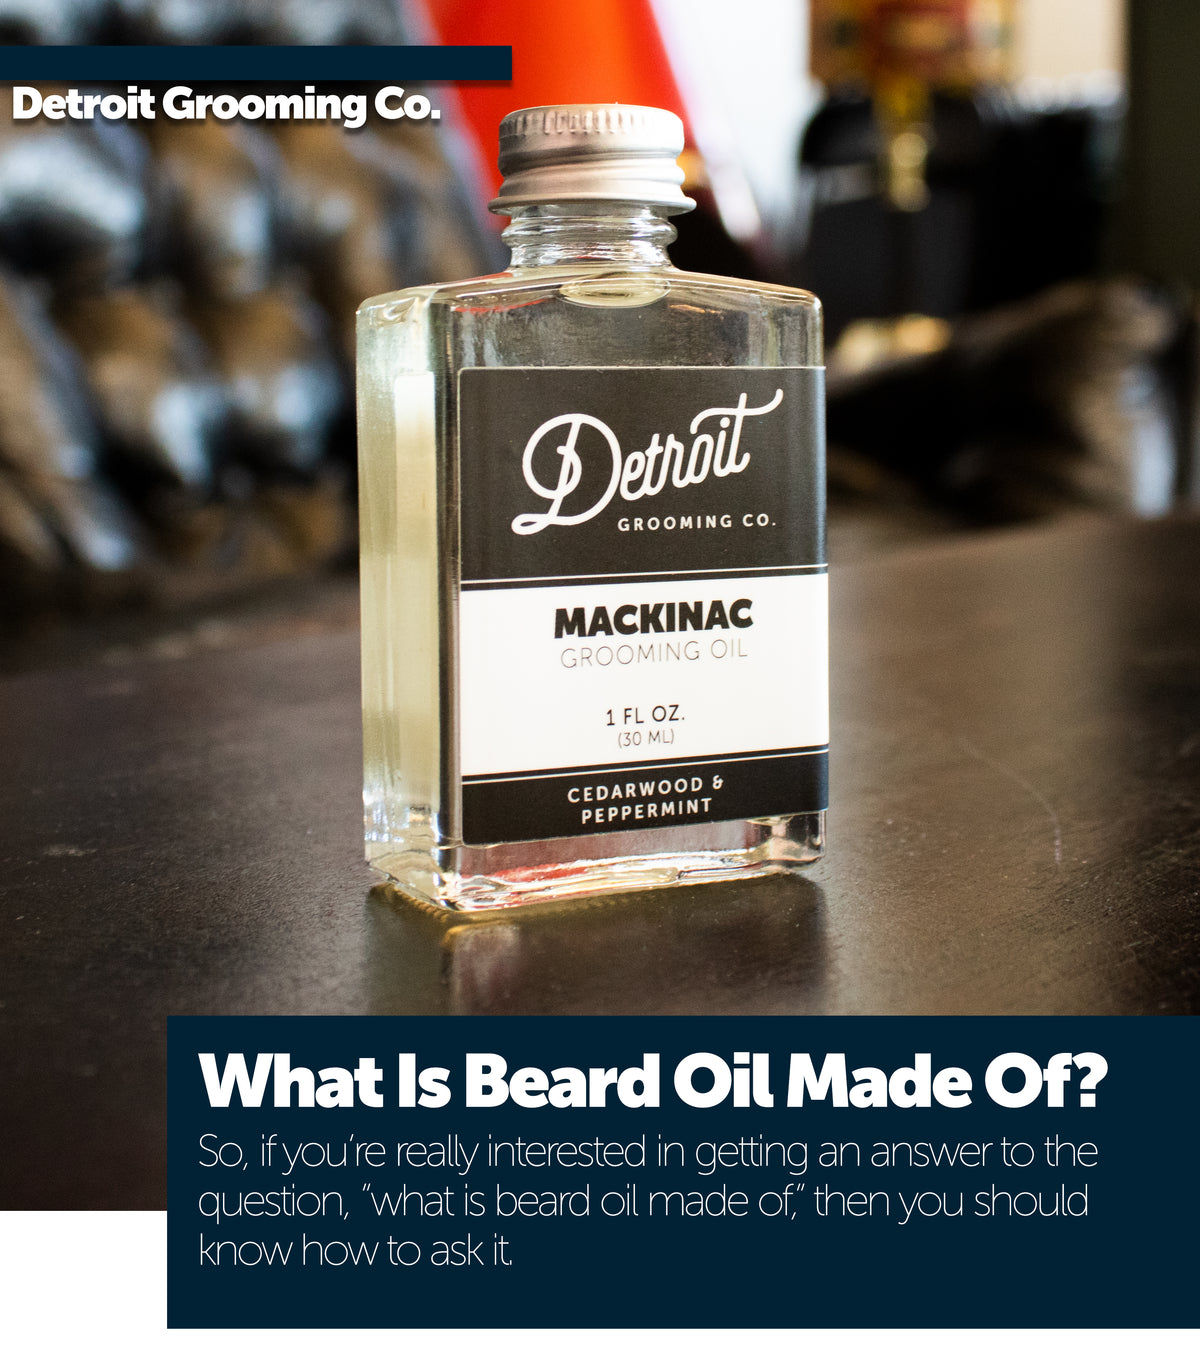 What is beard oil made of?